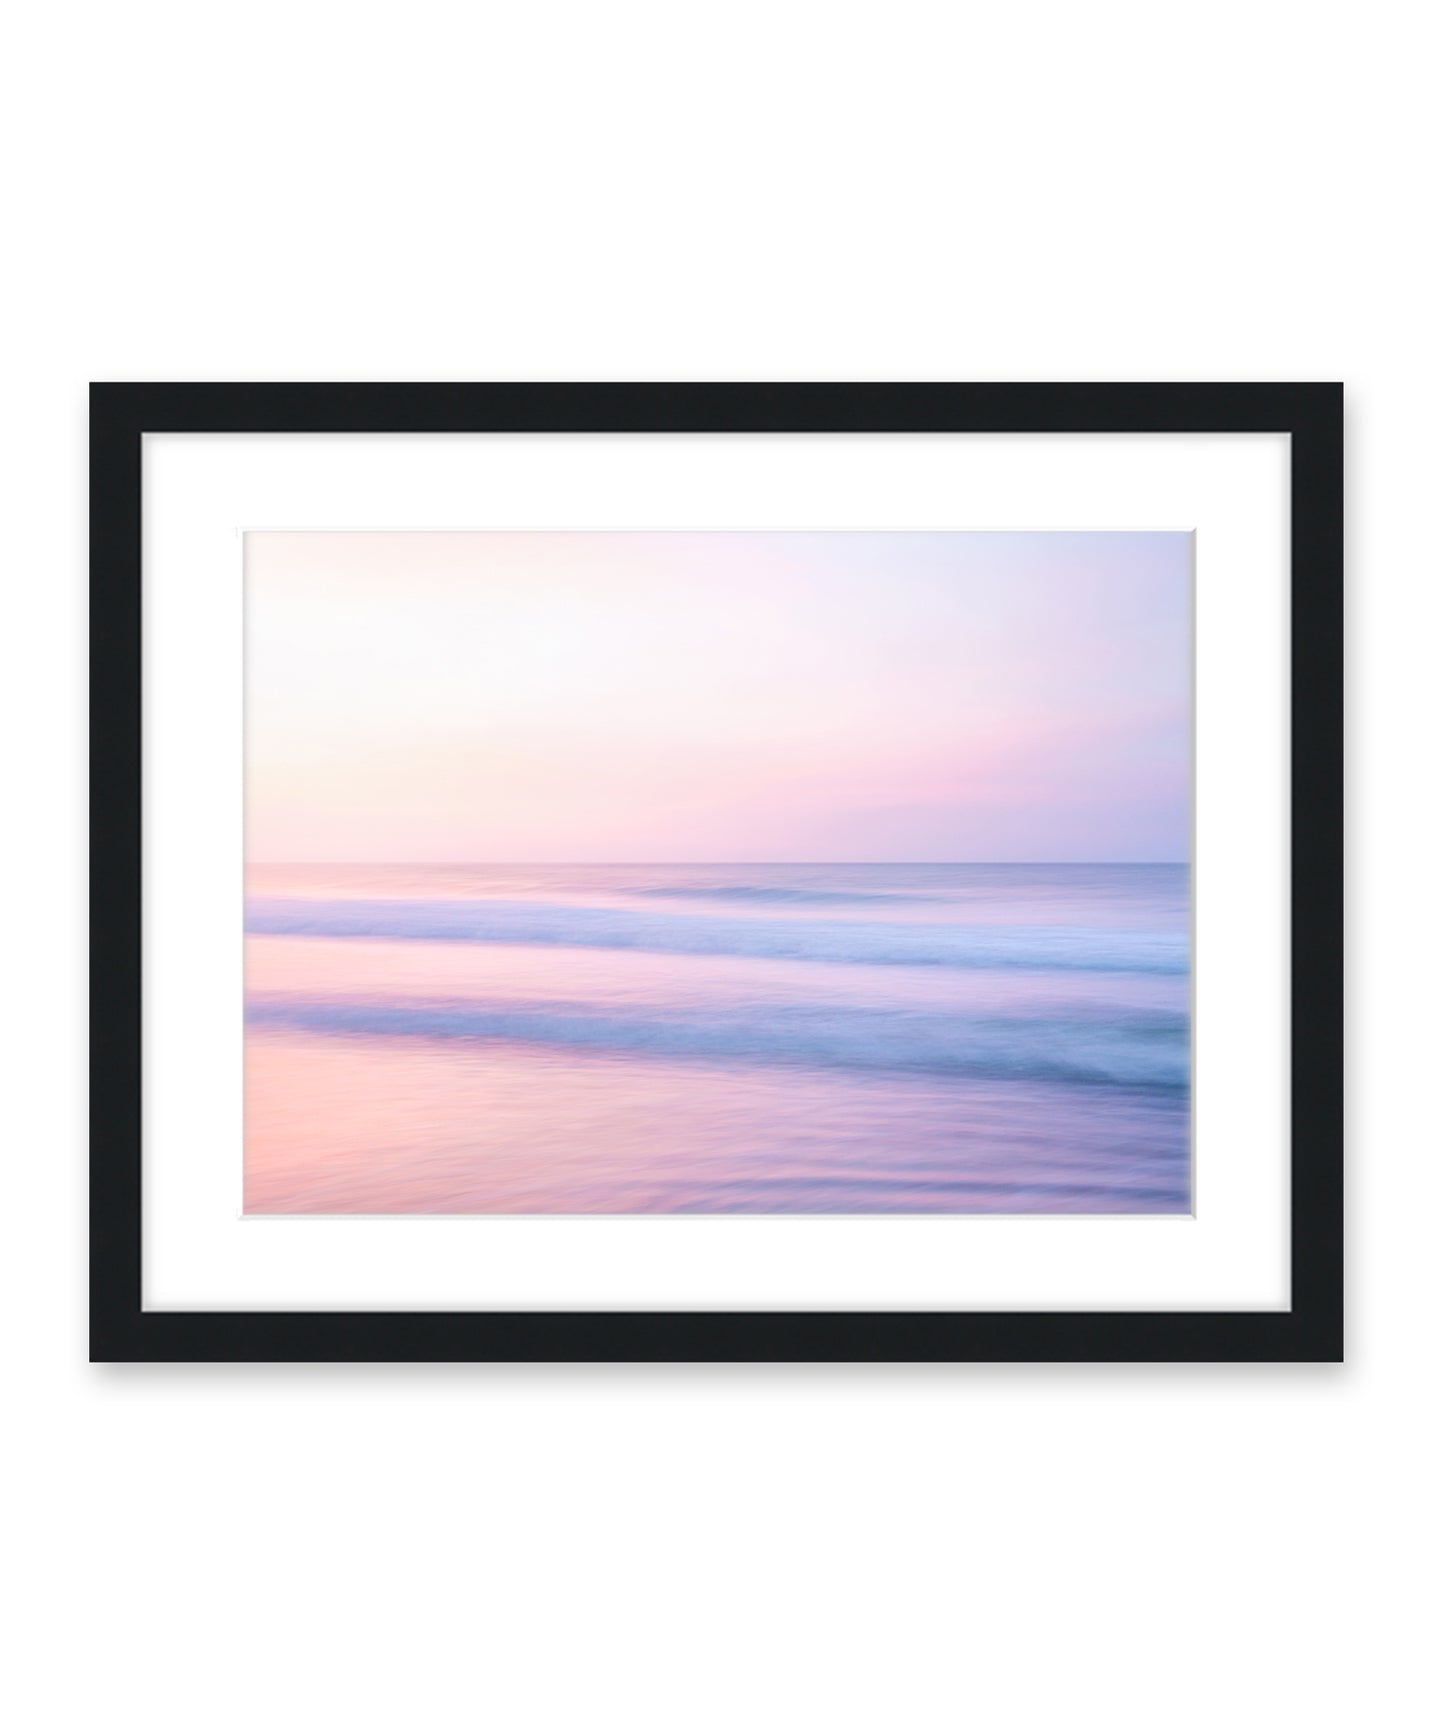 pastel pink abstract minimal ocean waves beach photograph, black frame by Wright and Roam